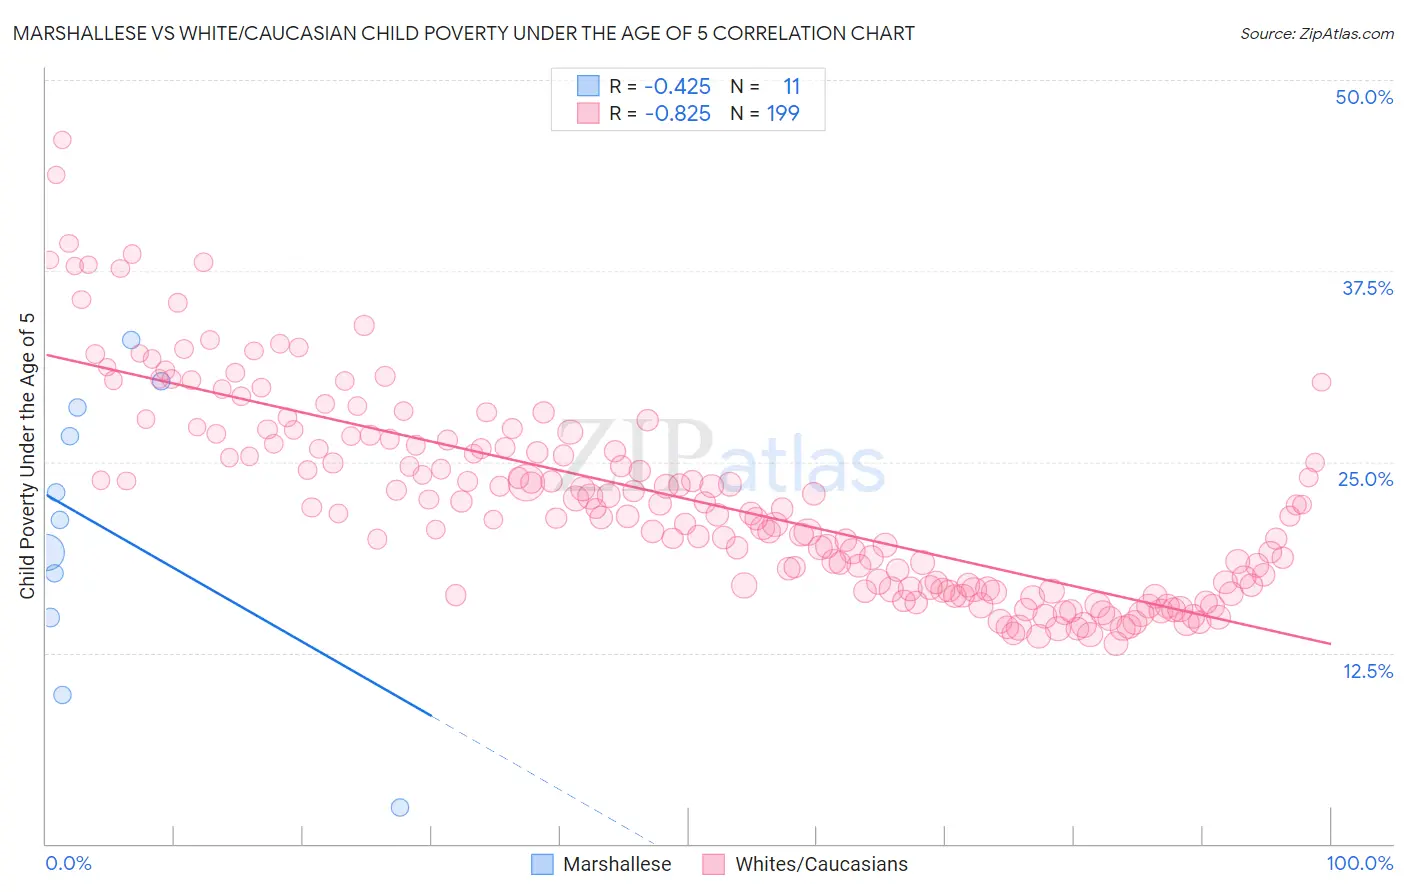 Marshallese vs White/Caucasian Child Poverty Under the Age of 5